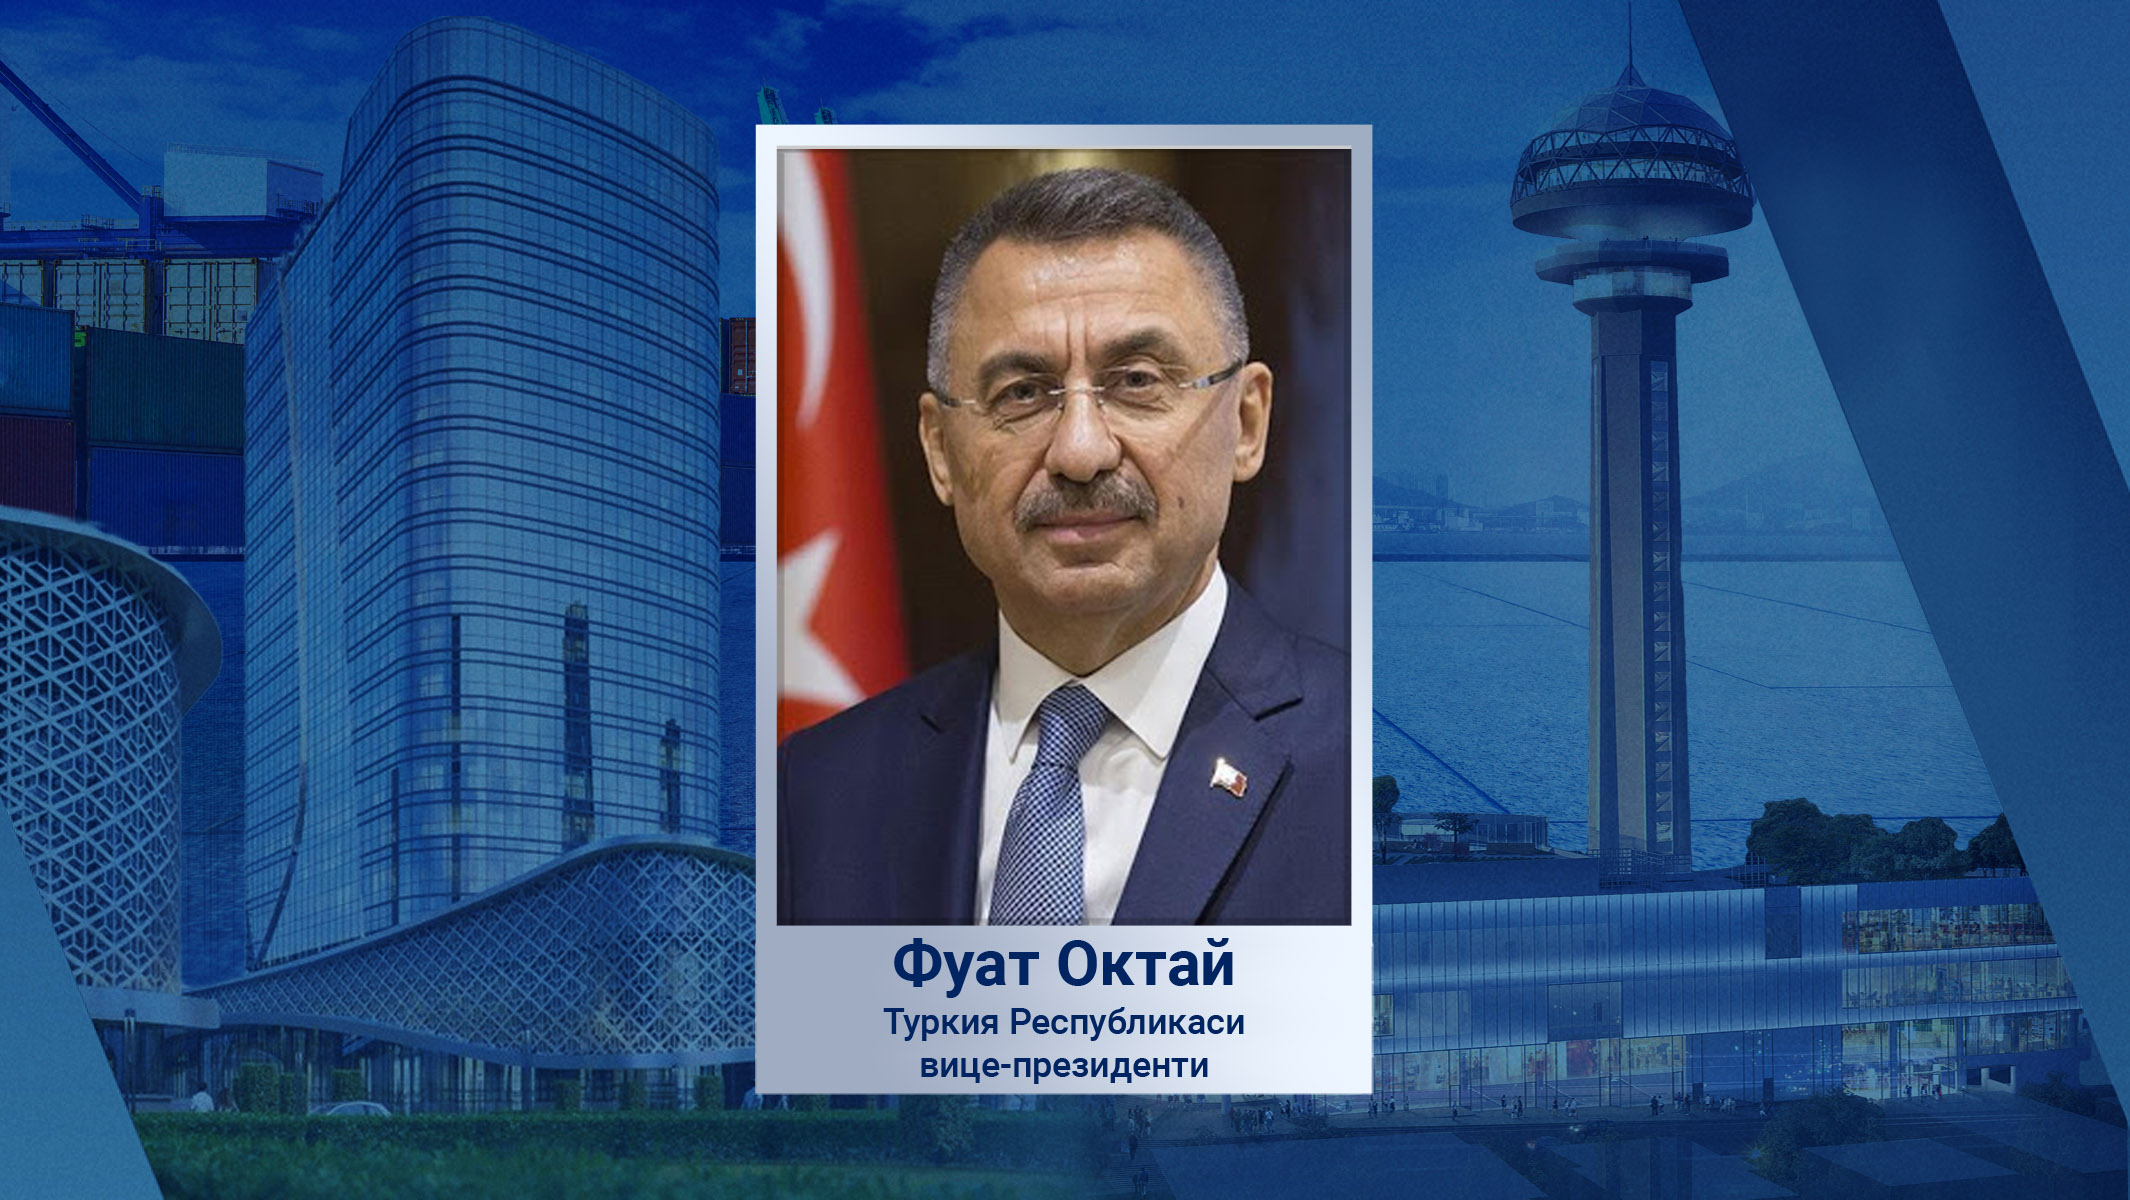 Negotiations on economic and trade cooperation with Turkey